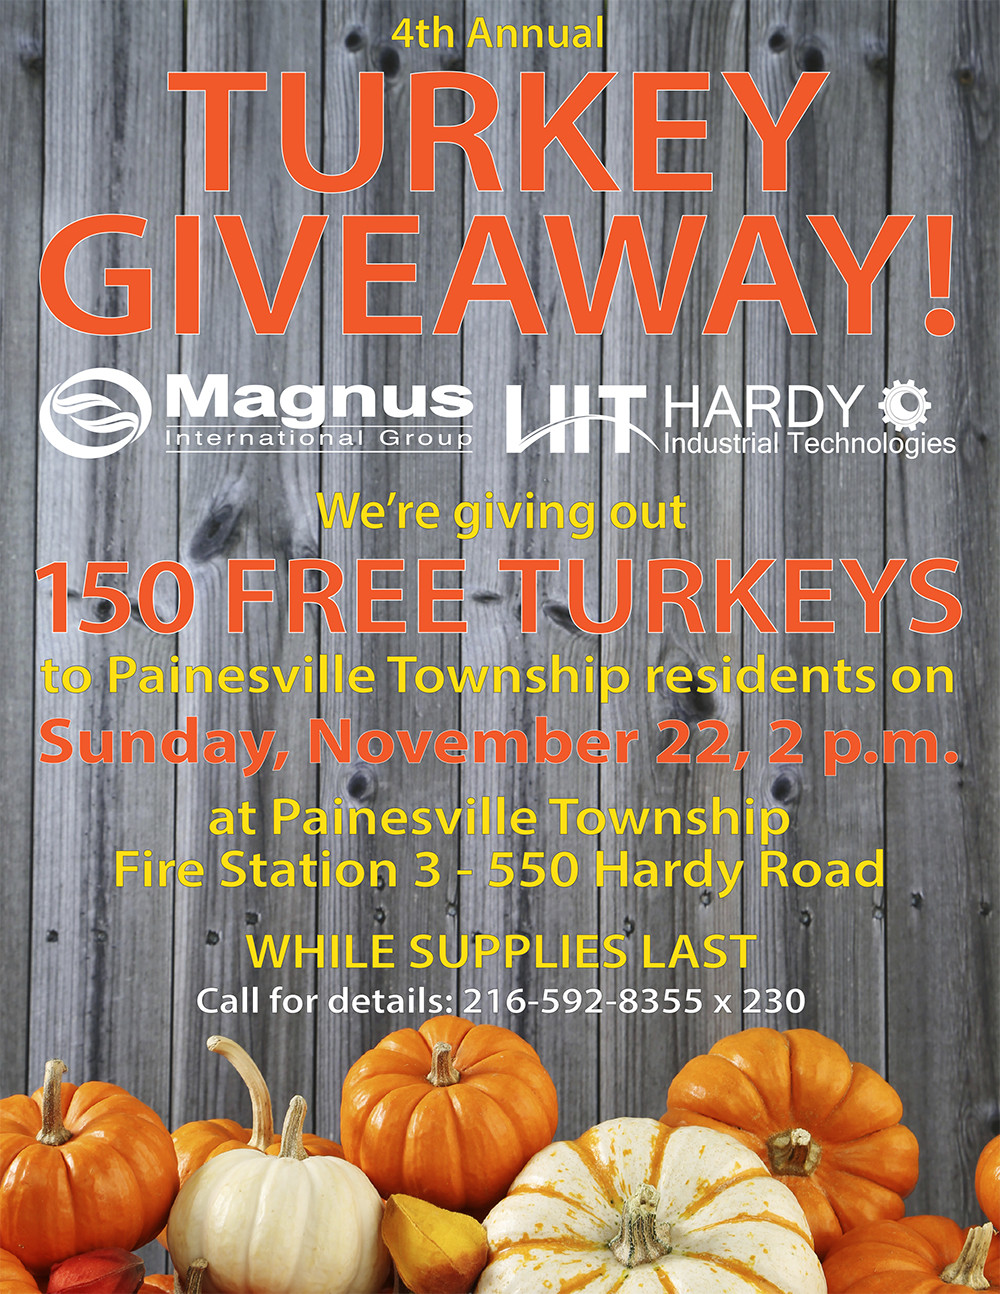 Thanksgiving Turkey Giveaway
 Magnus Hardy 4th Annual Turkey Giveaway Nov 22 in